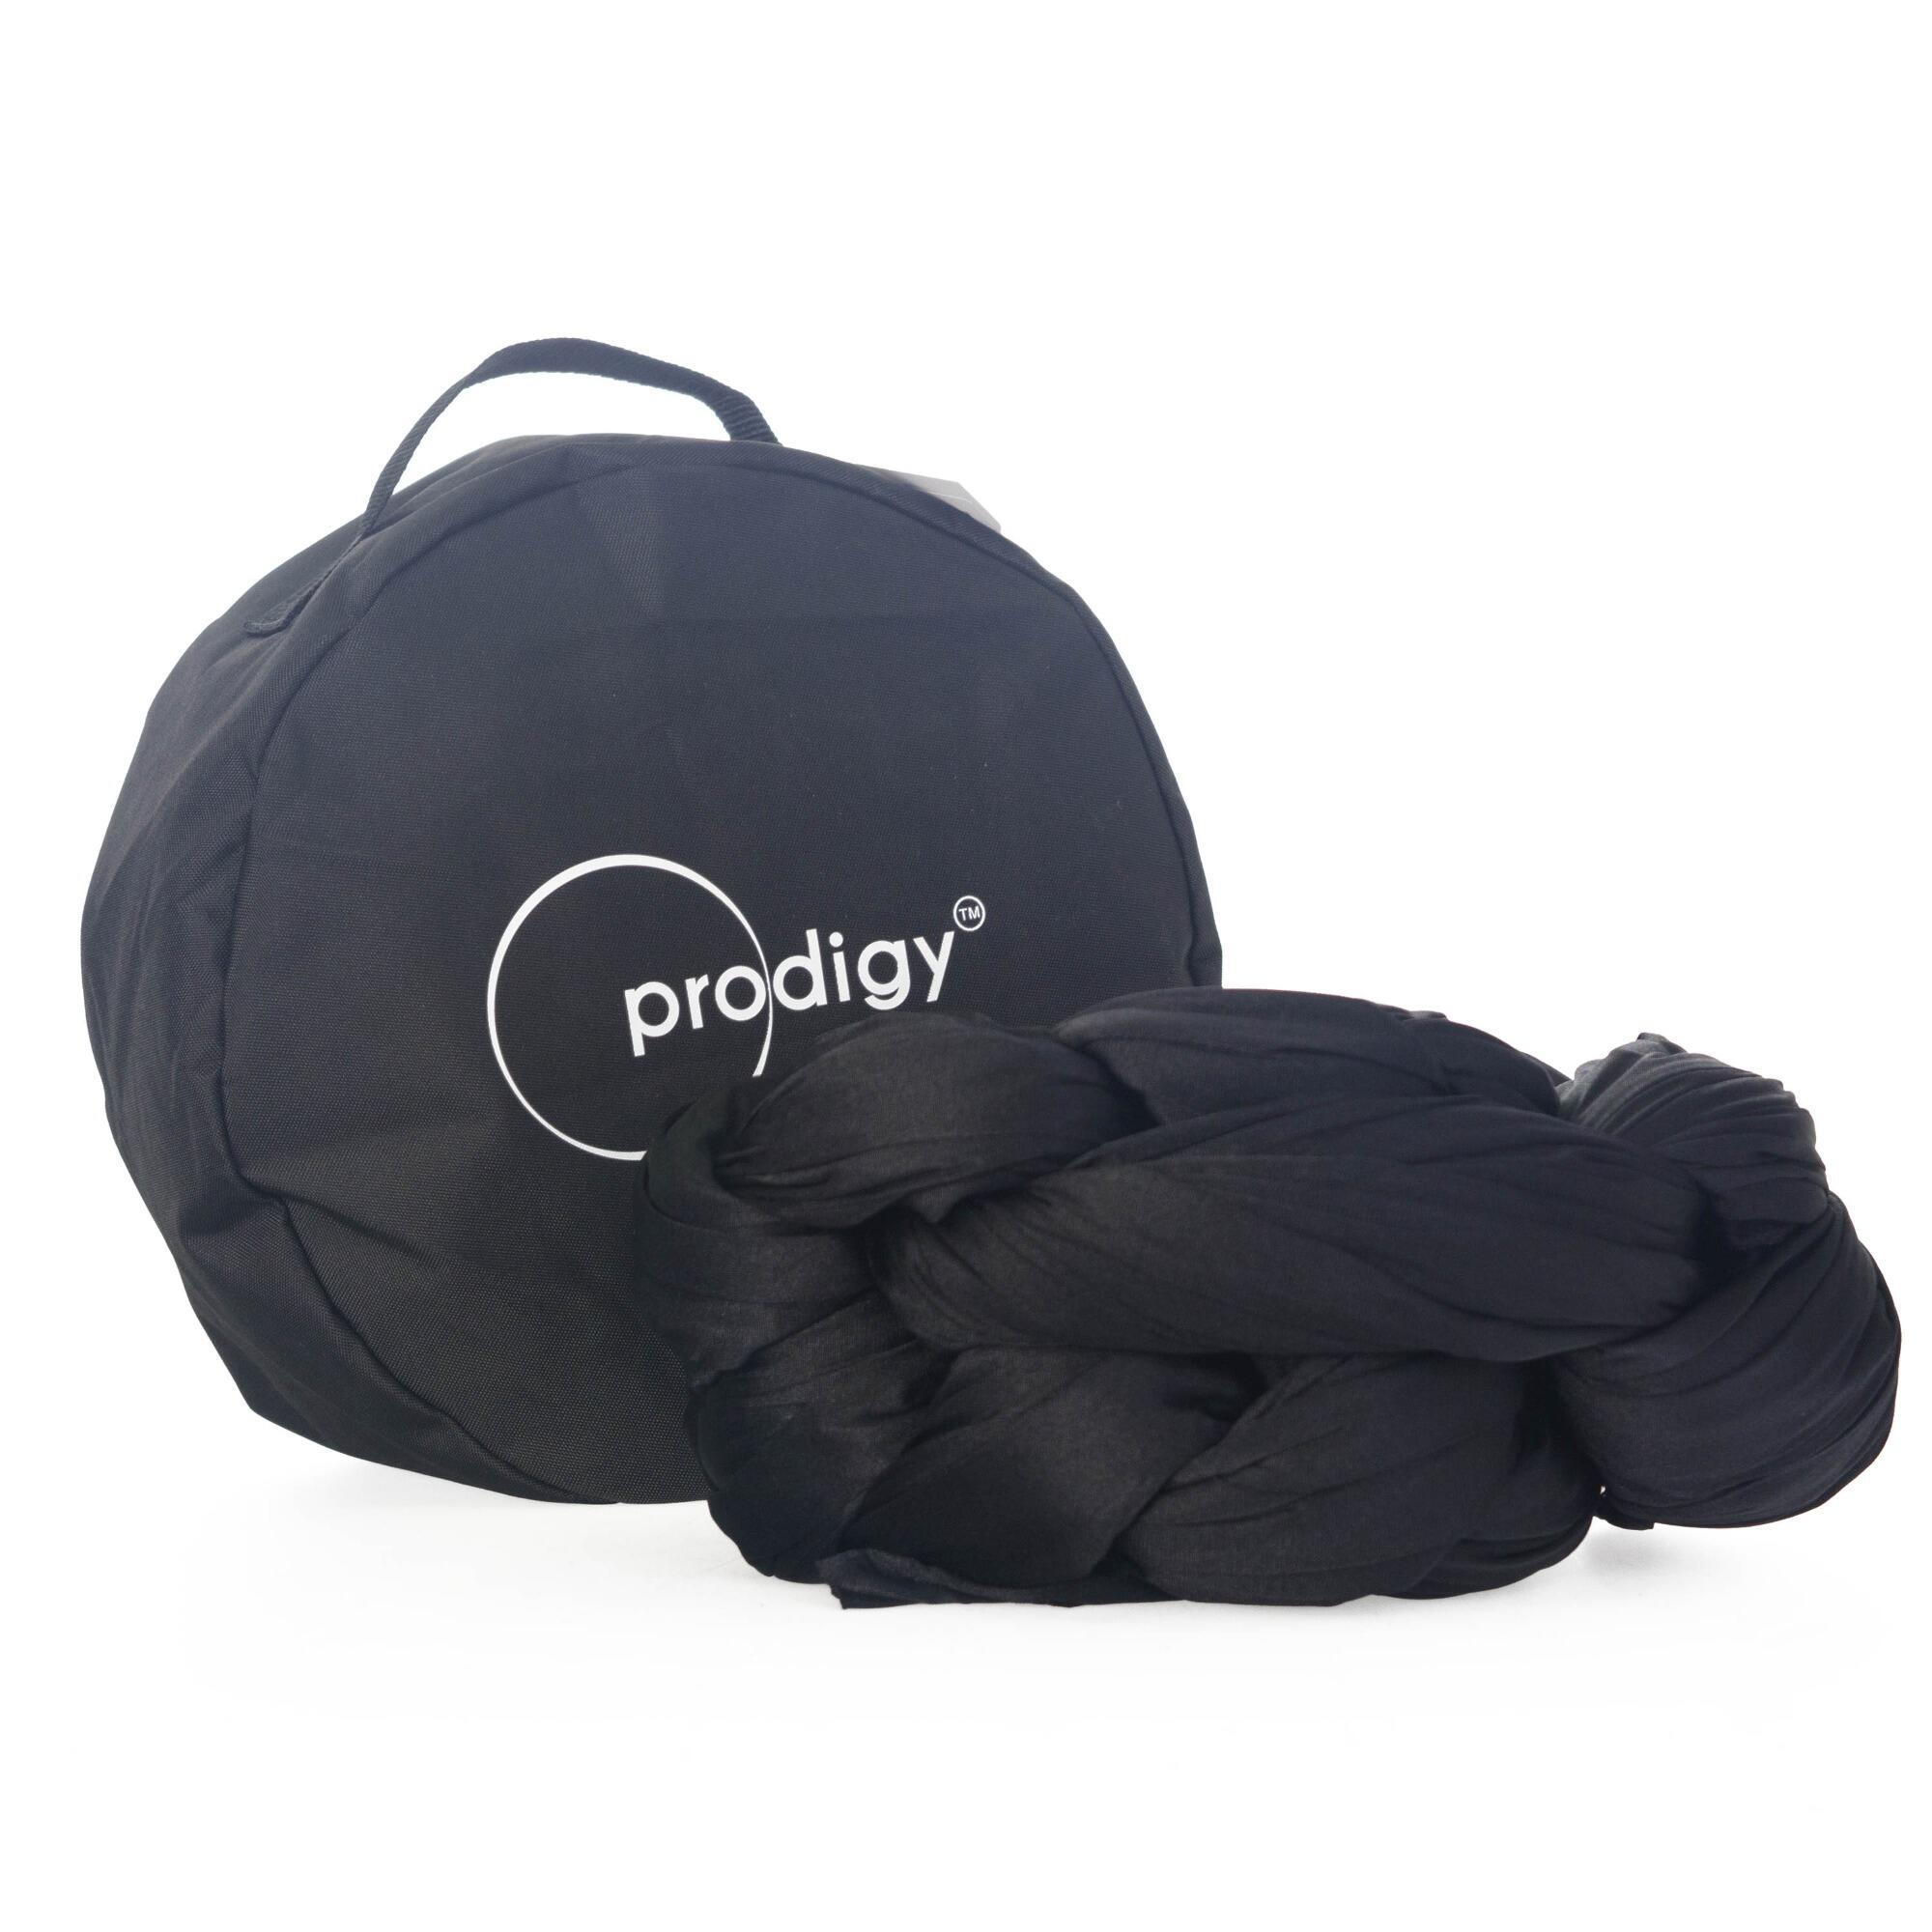 6m Prodigy Aerial Fabric for Hammocks -Black with round Prodigy bag 1/5